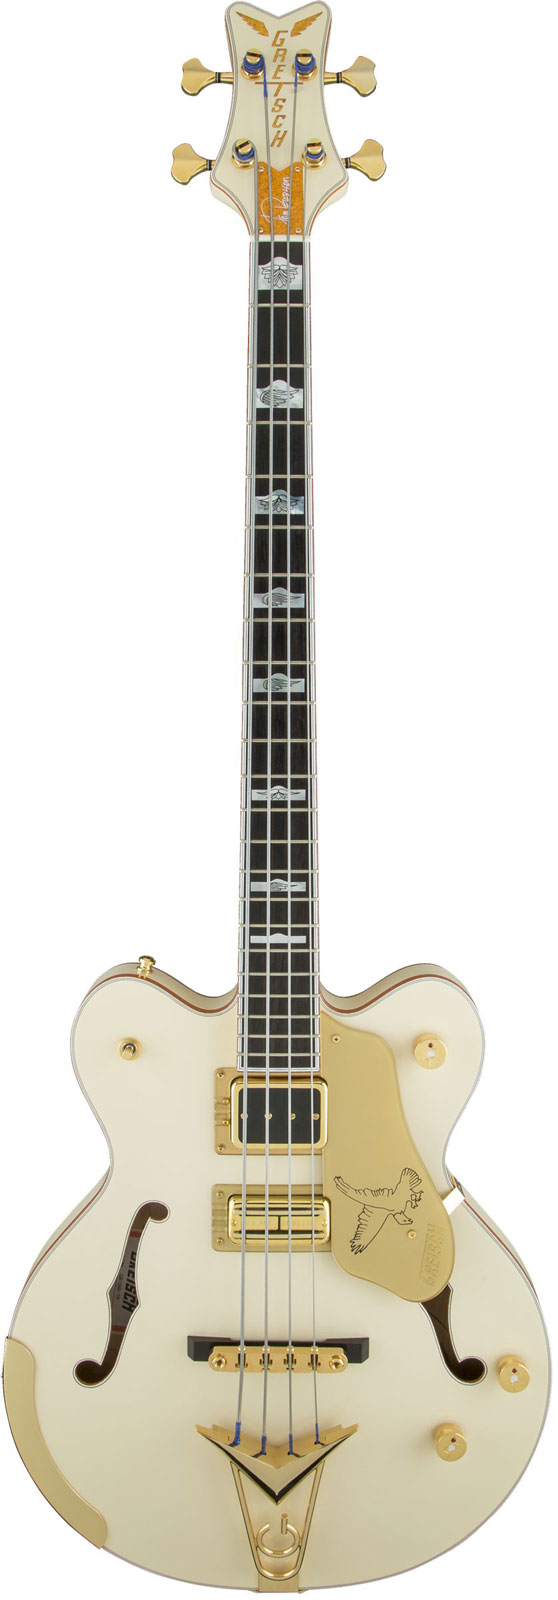 GRETSCH GUITARS G6136B-TP TOM PETERSSON SIGNATURE FALCON 4-STRING BASS WITH CADILLAC TAILPIECE, RUMBLE'TRON PICKUP,